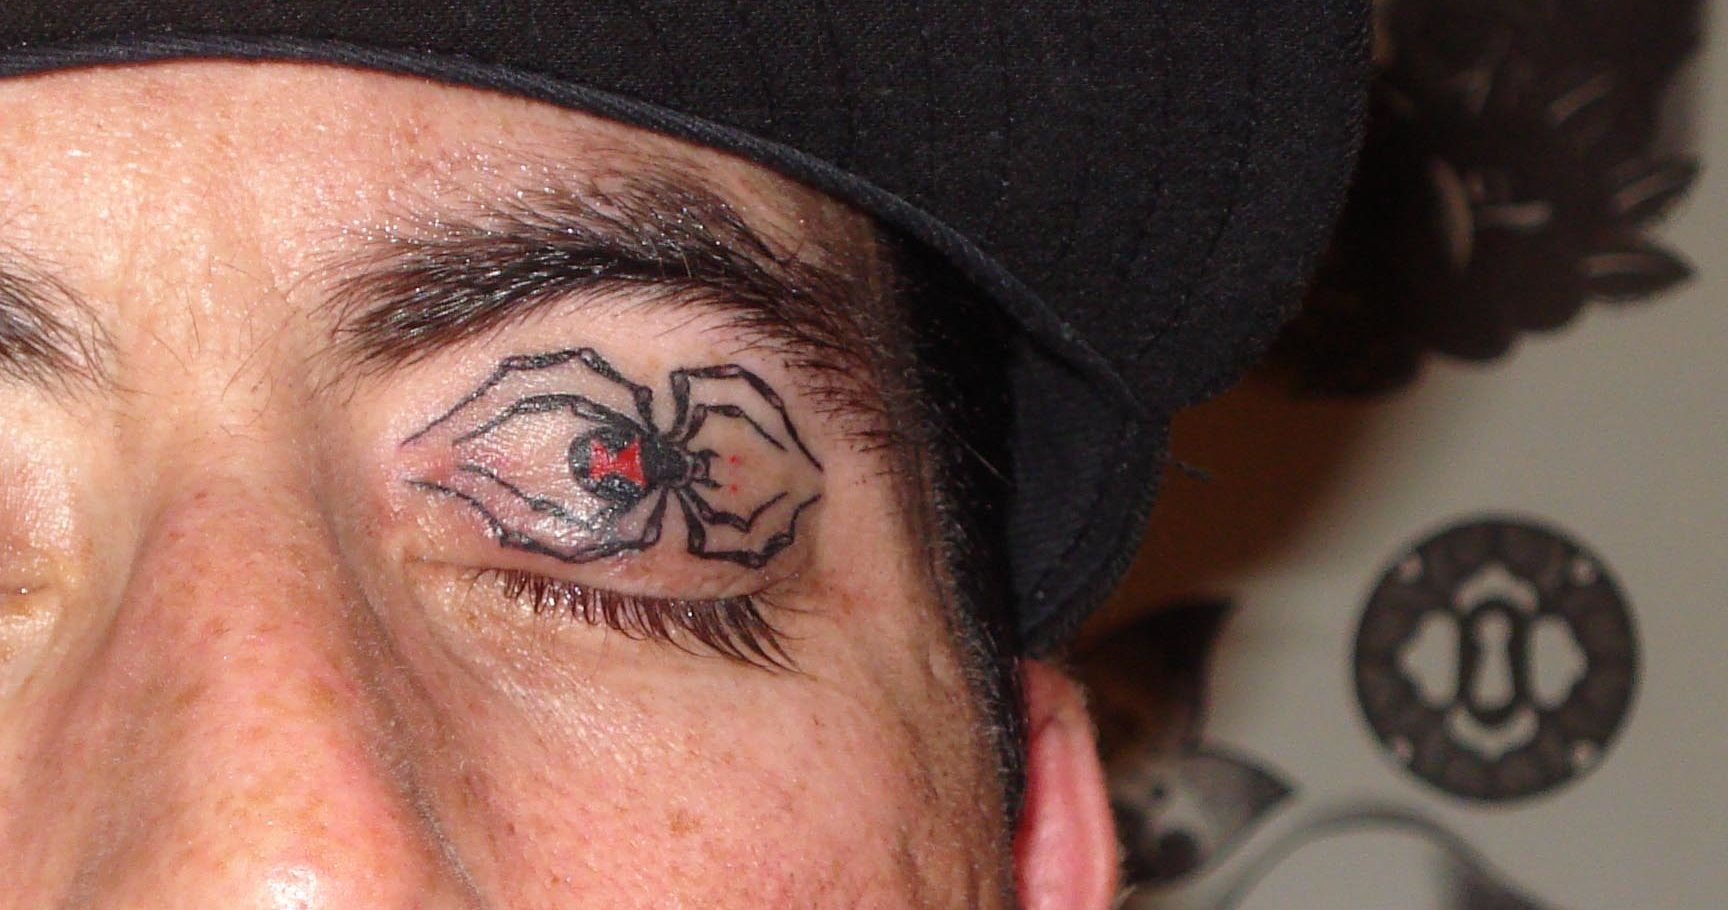 10 of the Creepiest Eyelid Tattoos You'll Wish You Didn't Just See